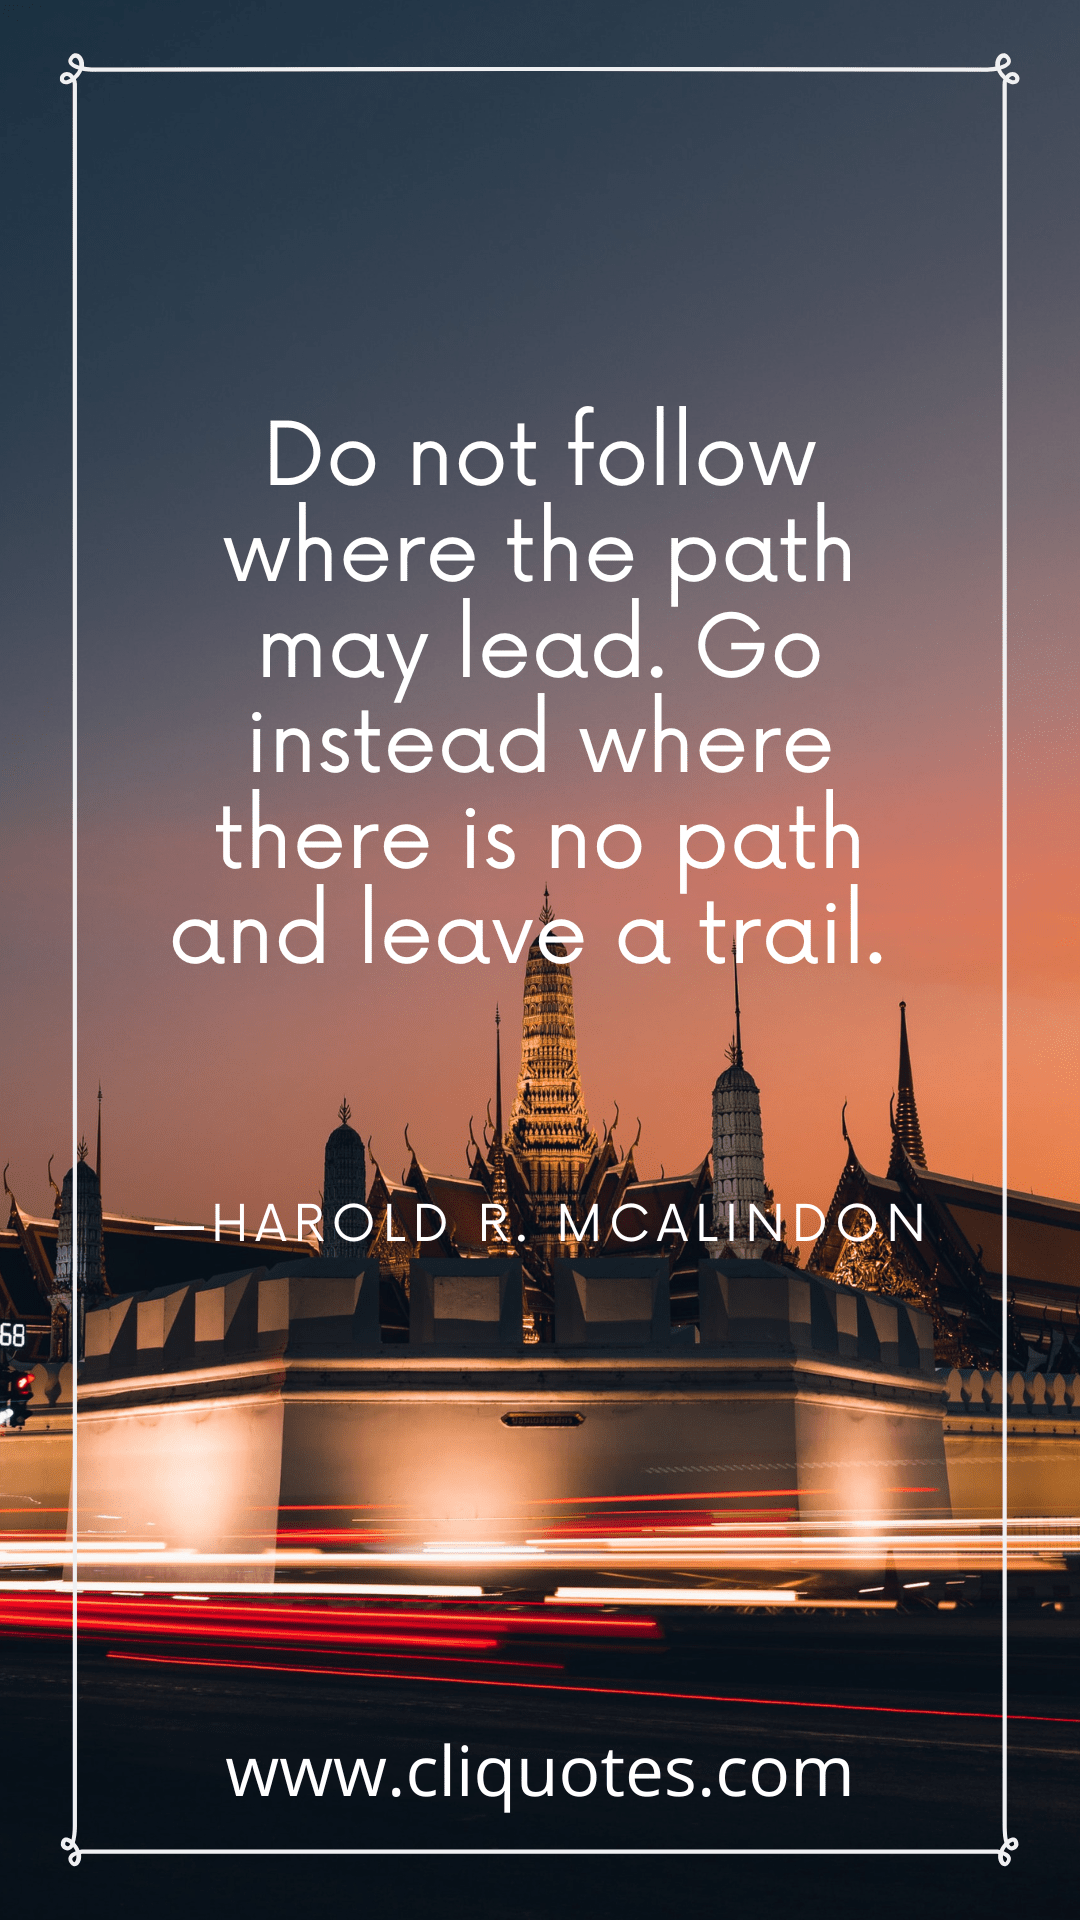 Do not follow where the path may lead. Go instead where there is no path and leave a trail. —HAROLD R. MCALINDON